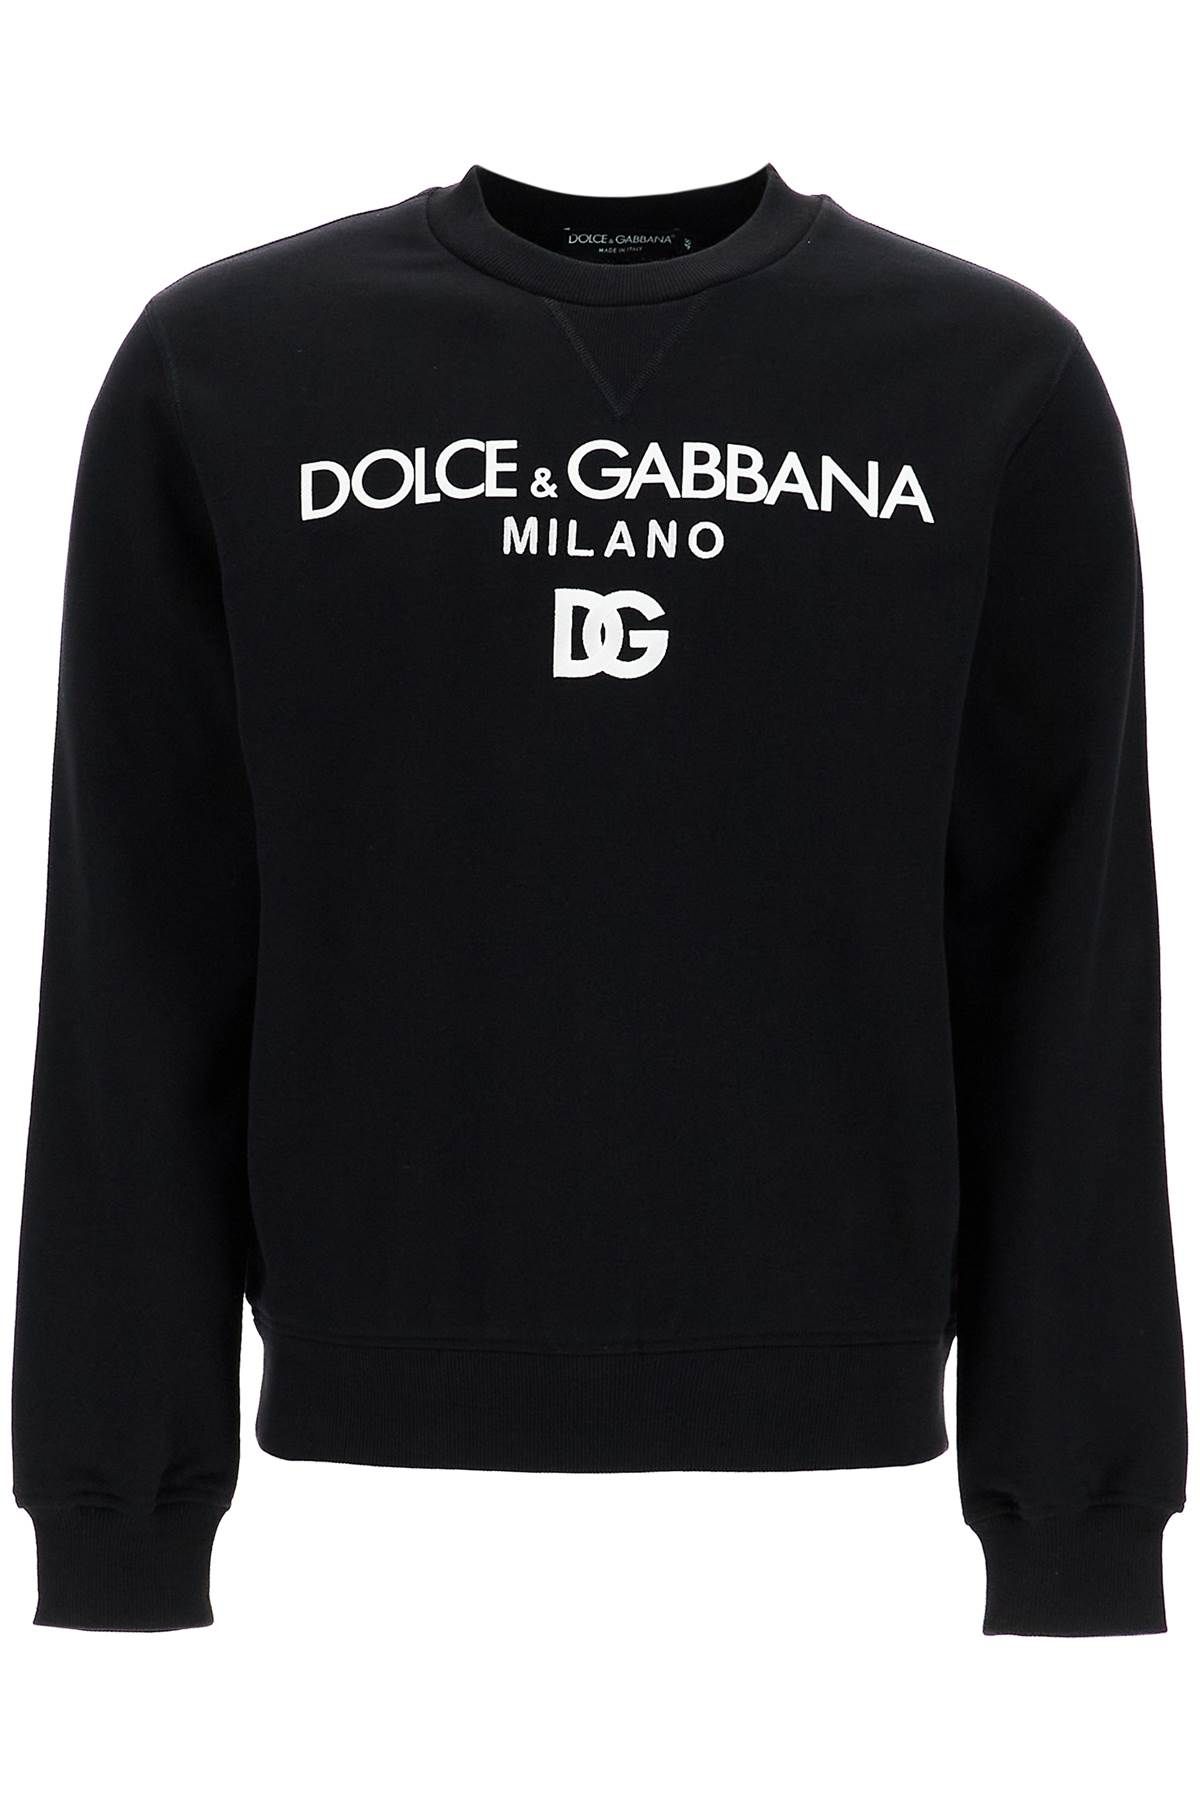 Dolce & Gabbana DOLCE & GABBANA "round neck sweatshirt with dg embroidery and lettering